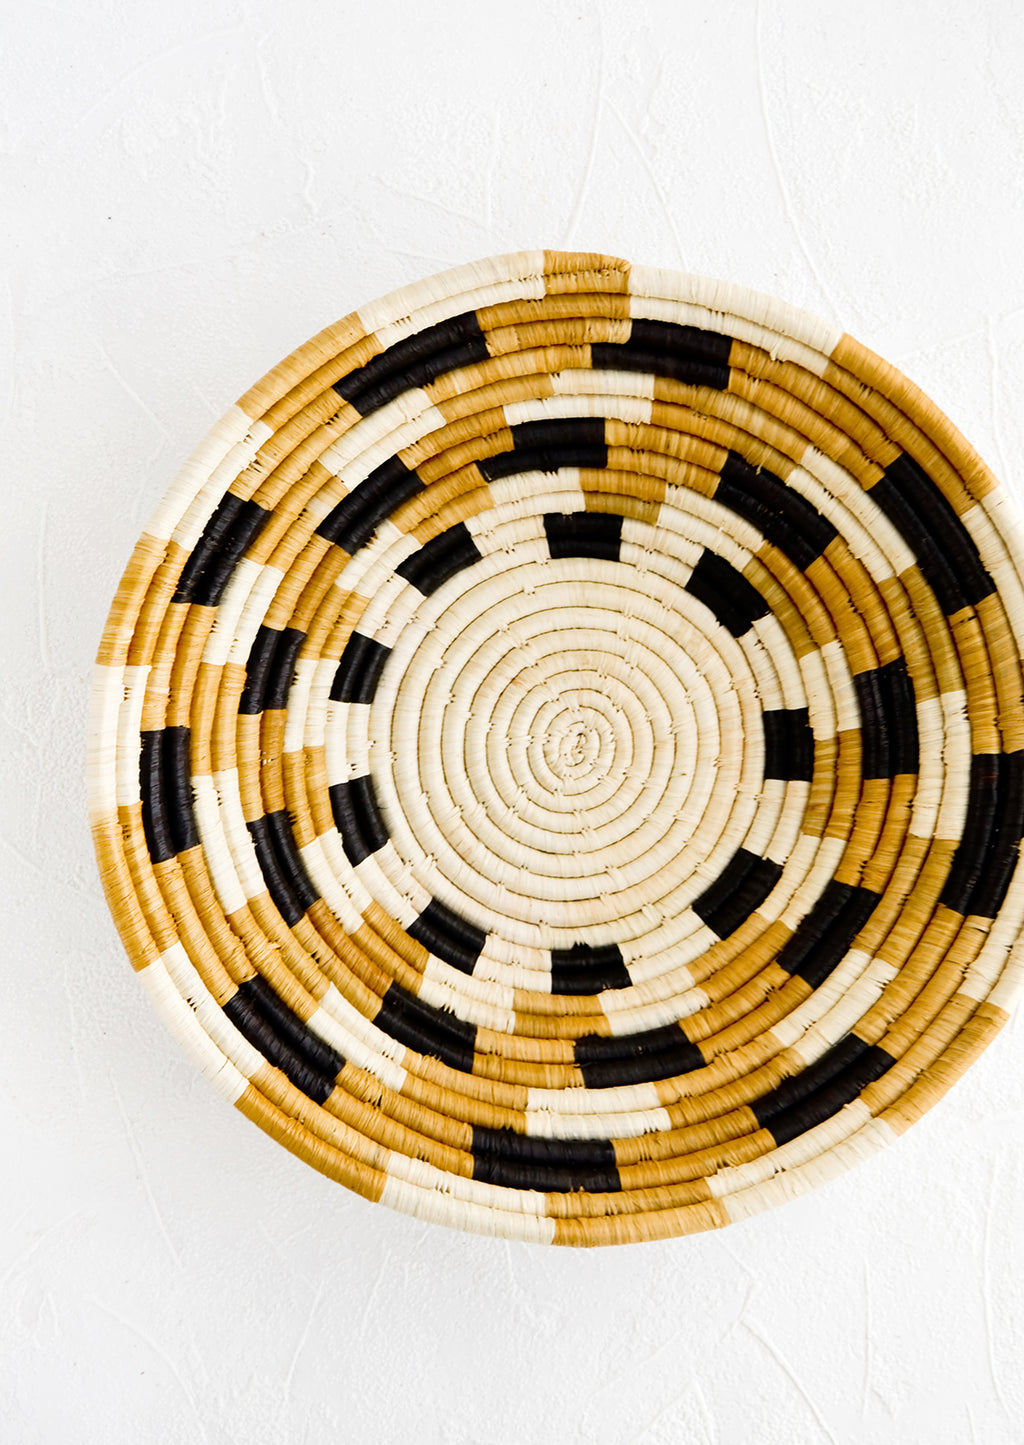 1: Round woven raffia bowl with checkered pattern in natural, tan and black